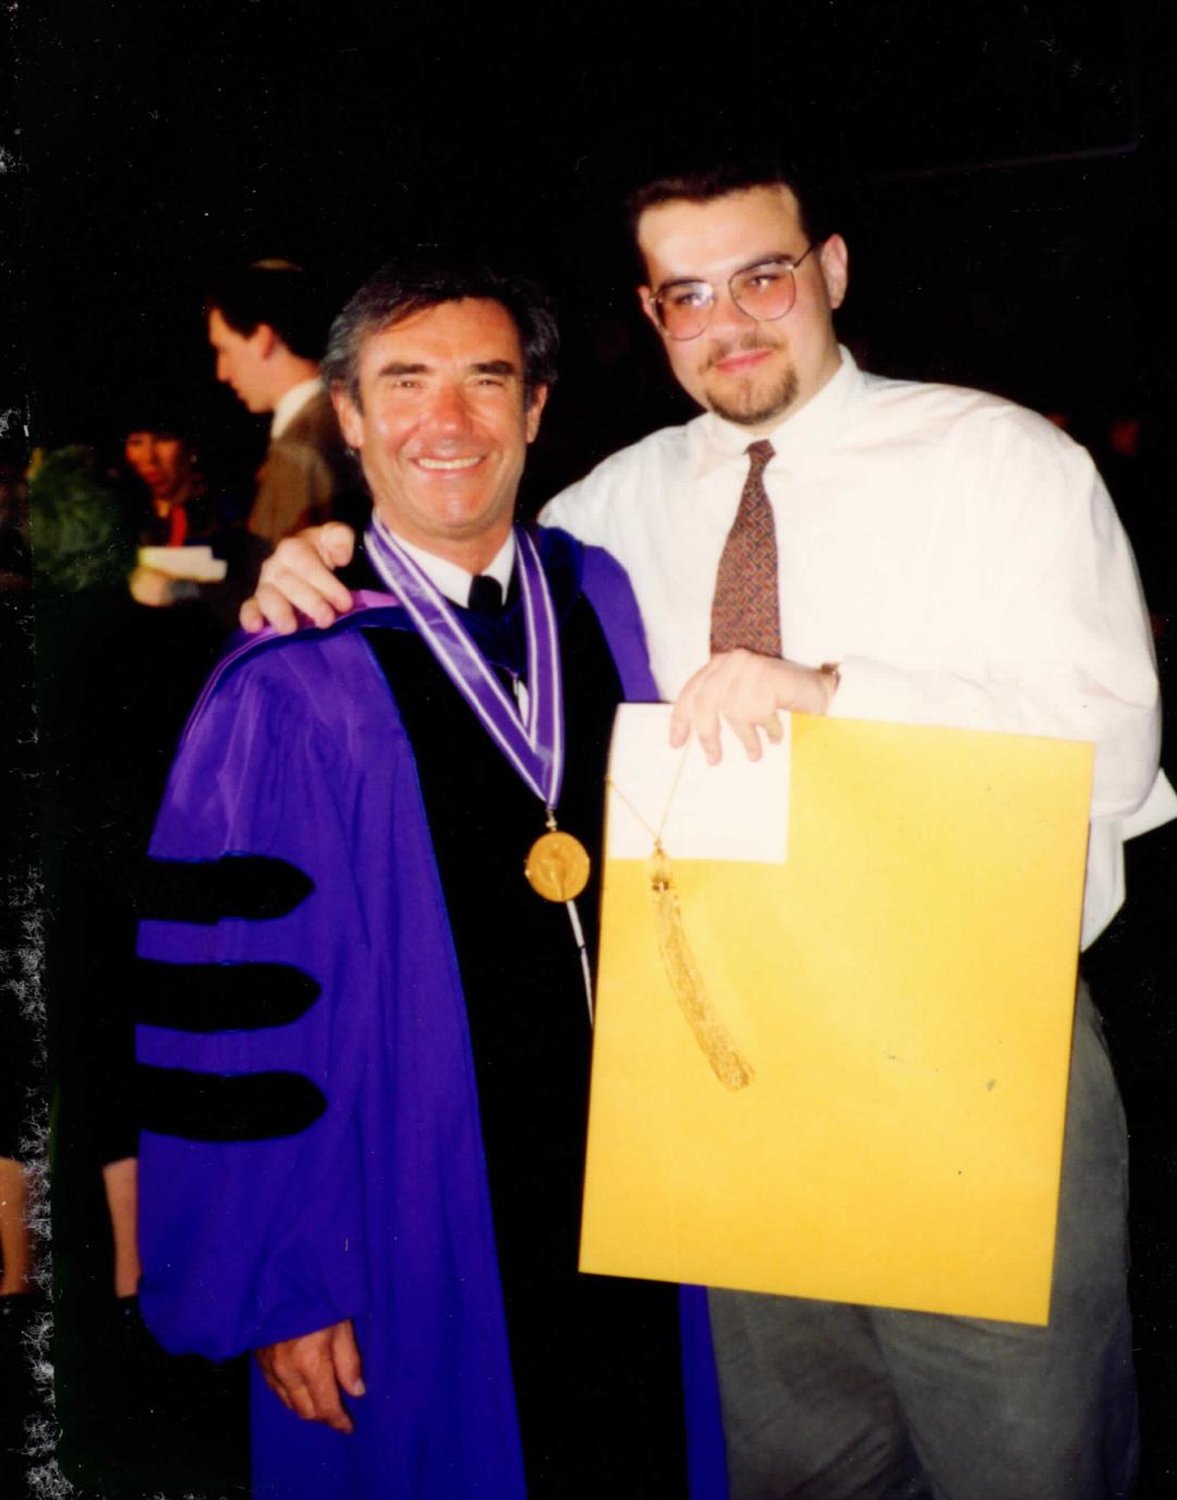 Joseph DiSalvo, right, created a film to honor his former professor, Bob Gurland, after he made a great impact on his life as a student at New York University.